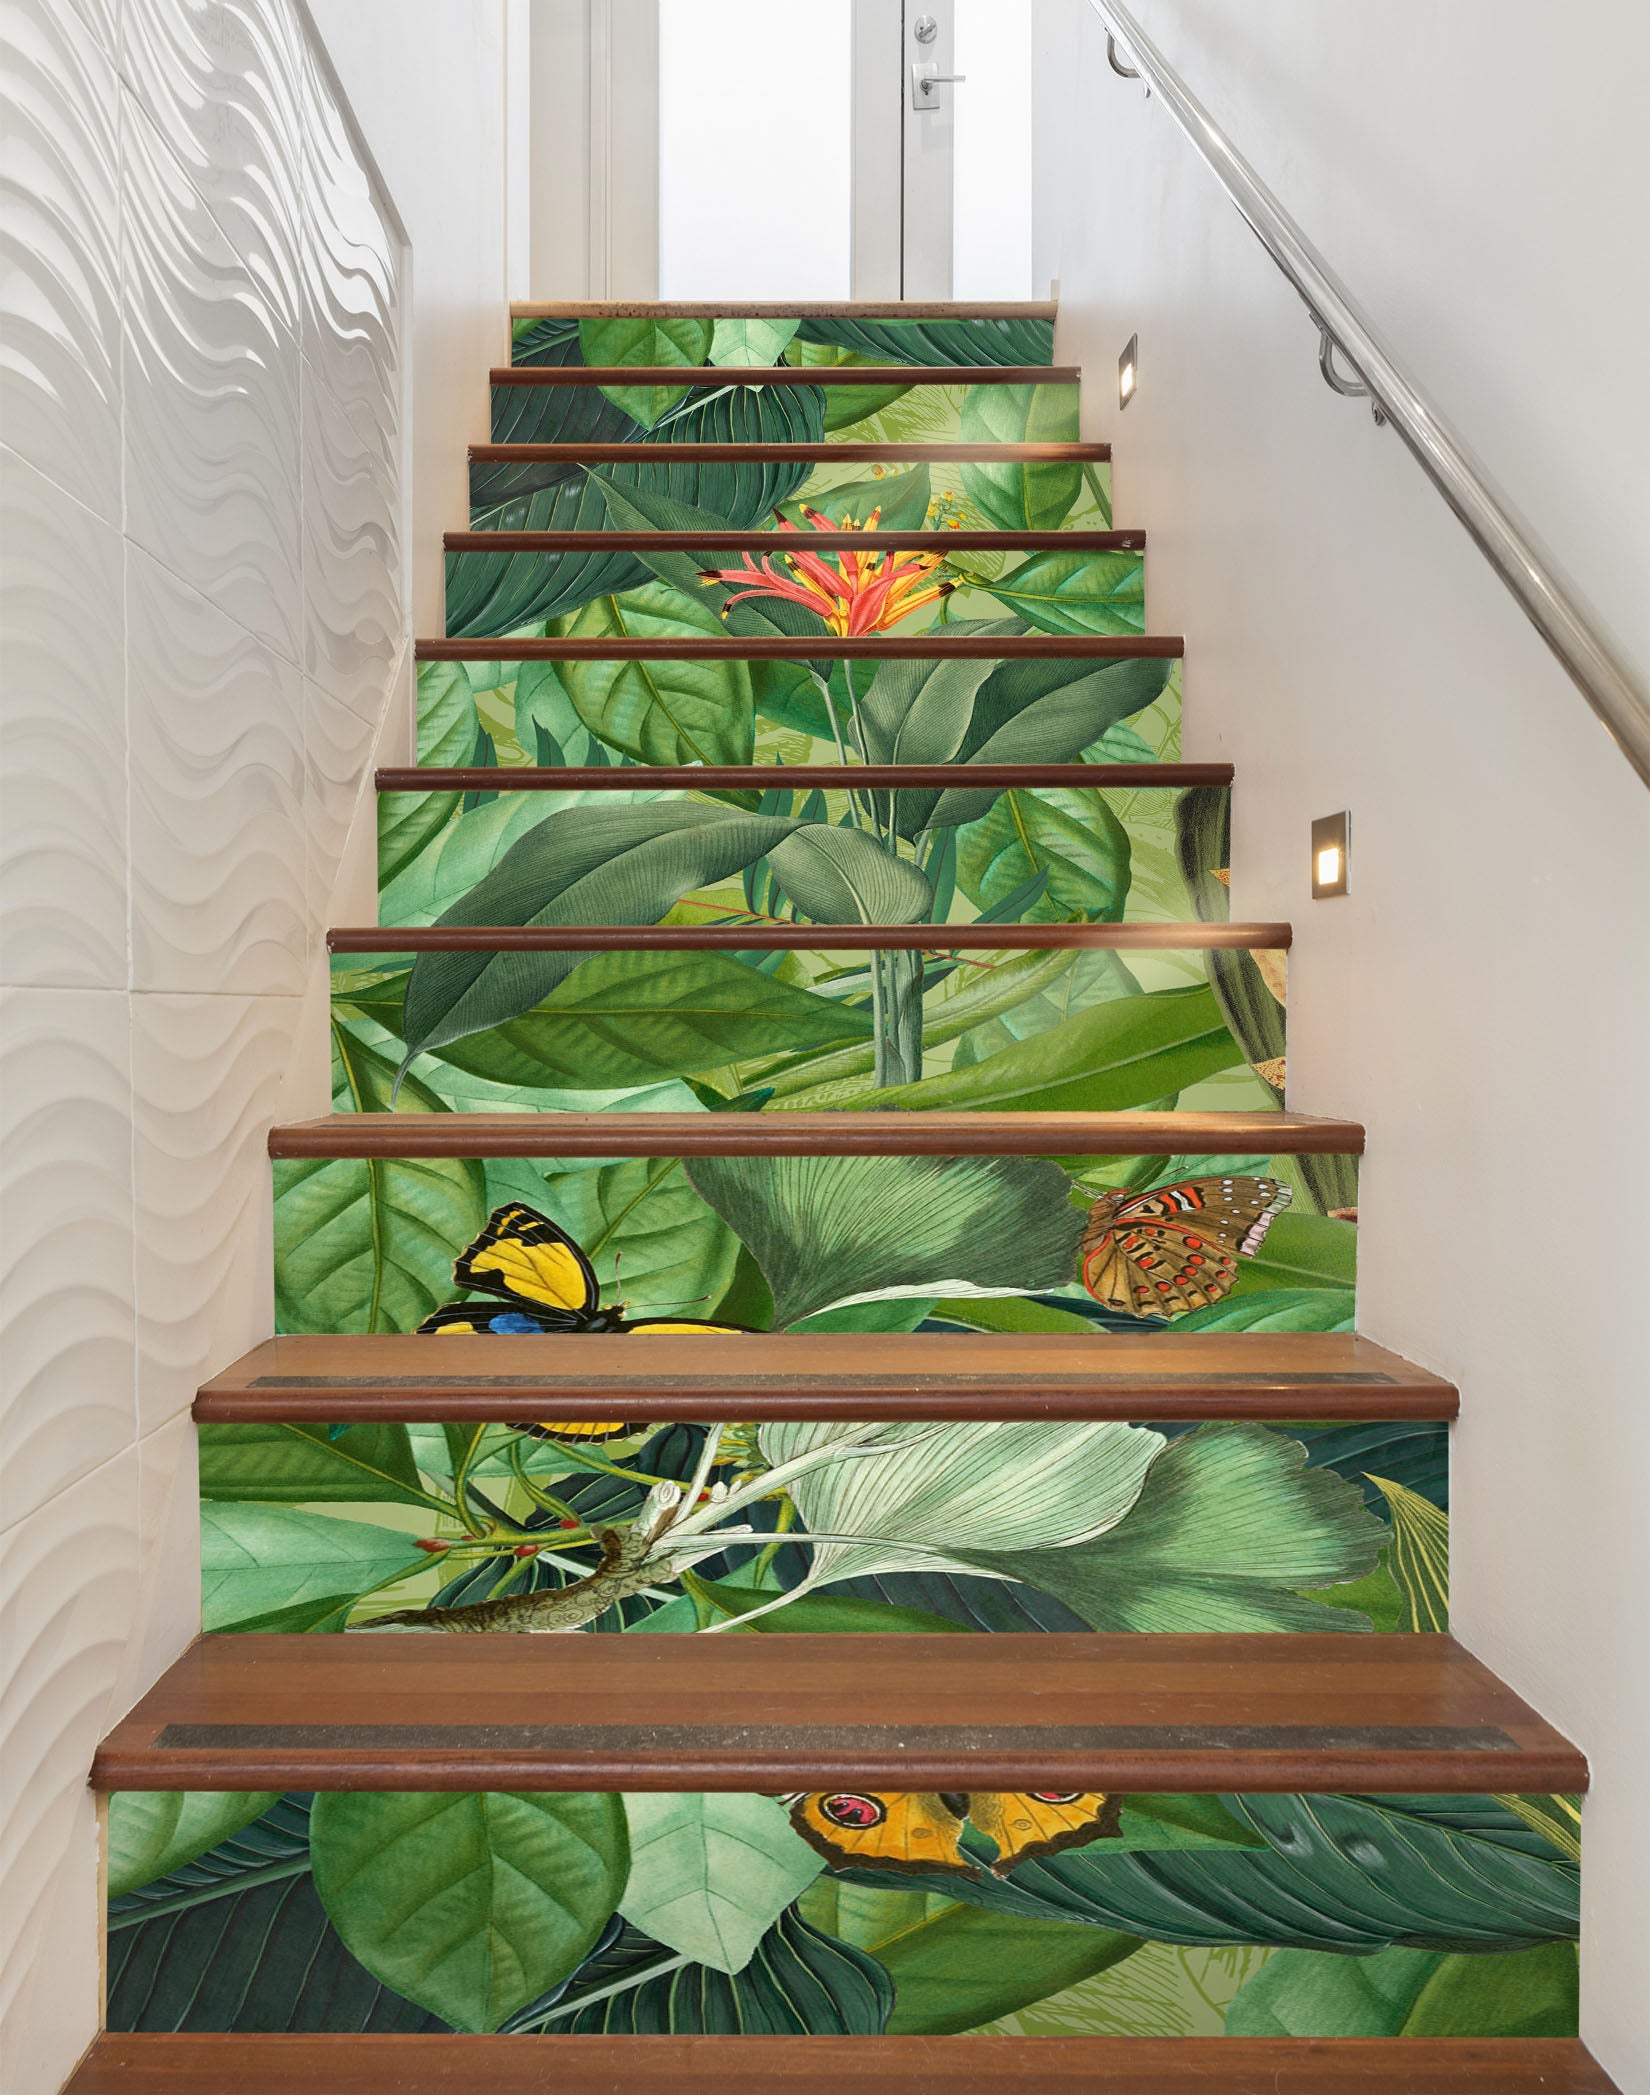 3D Jungle Grove 109190 Andrea Haase Stair Risers